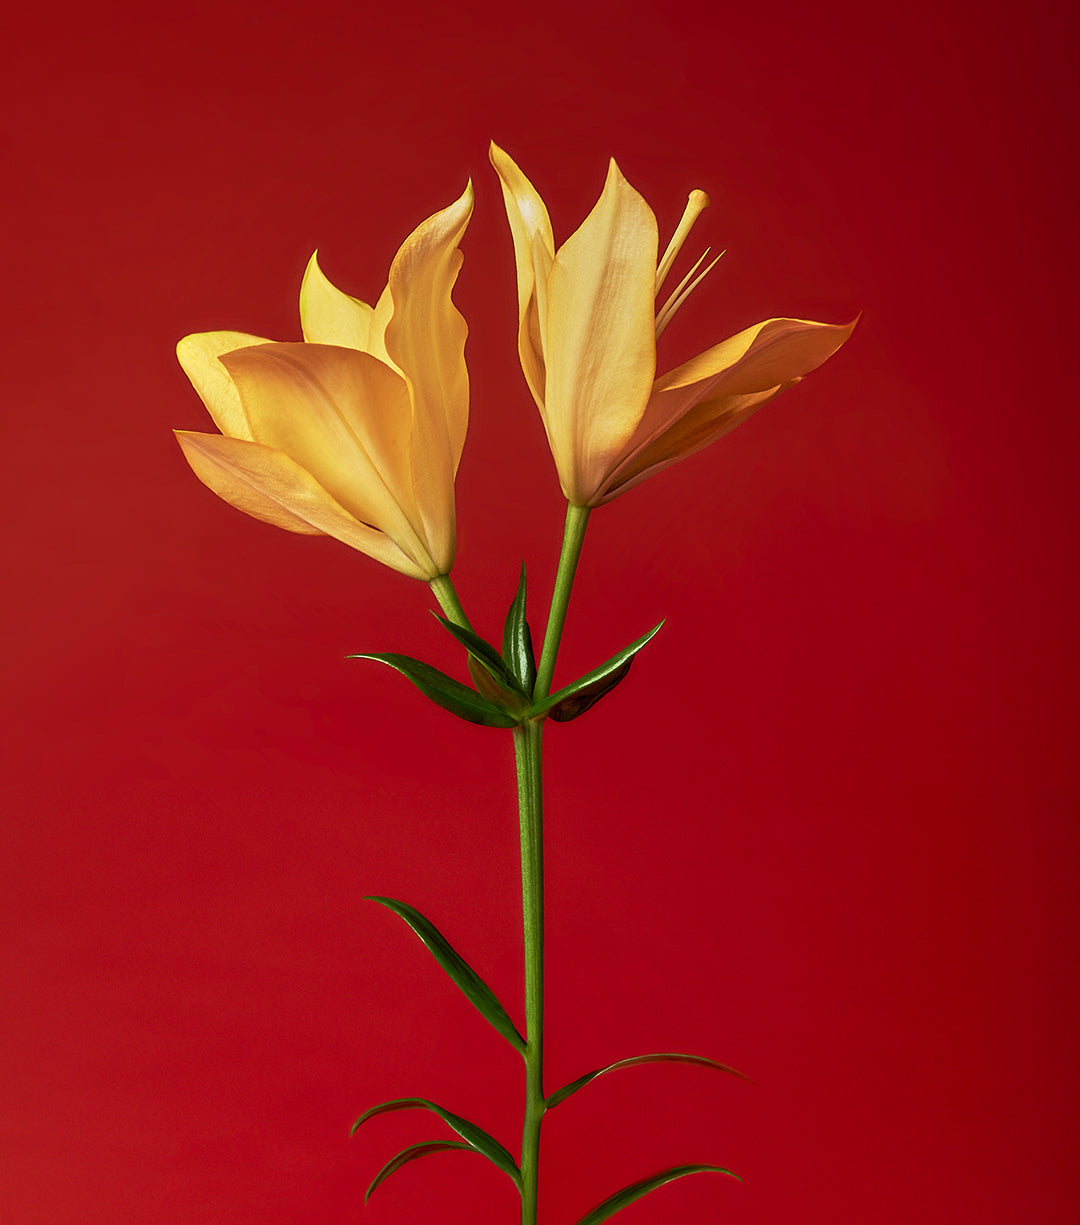 Vivid close-up of a yellow flower atop a radiant red background, evoking warmth and vitality.